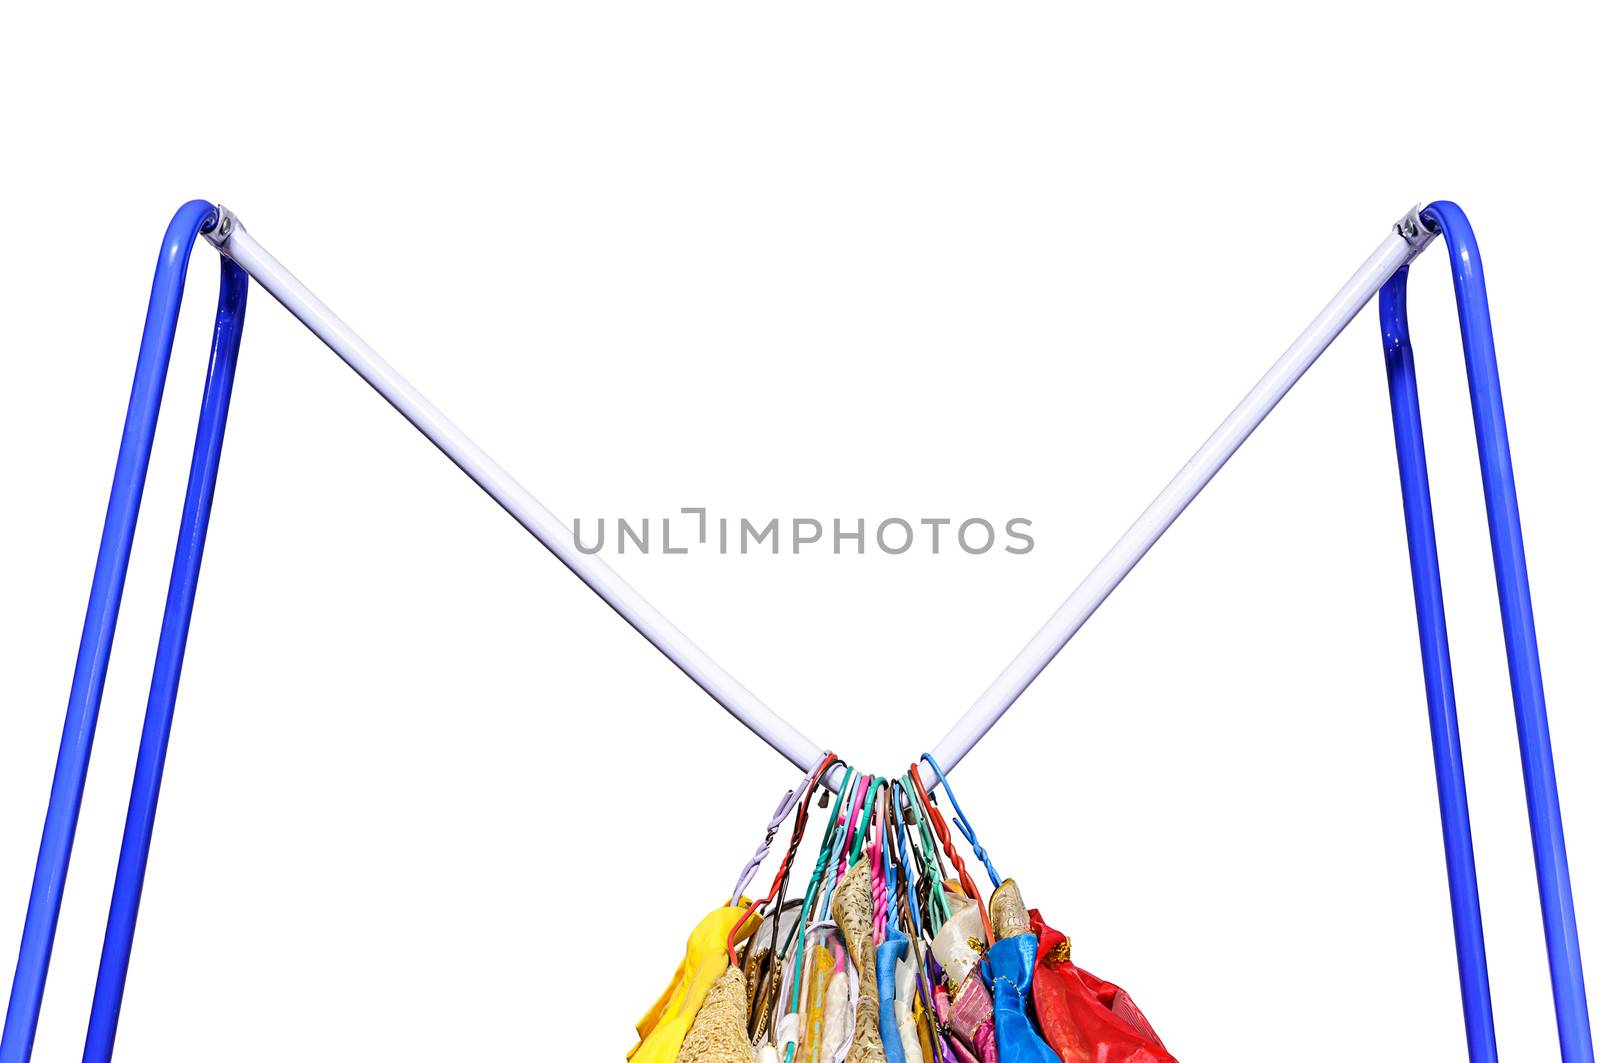 Clothes on hanger deduct rail, isolated on white background